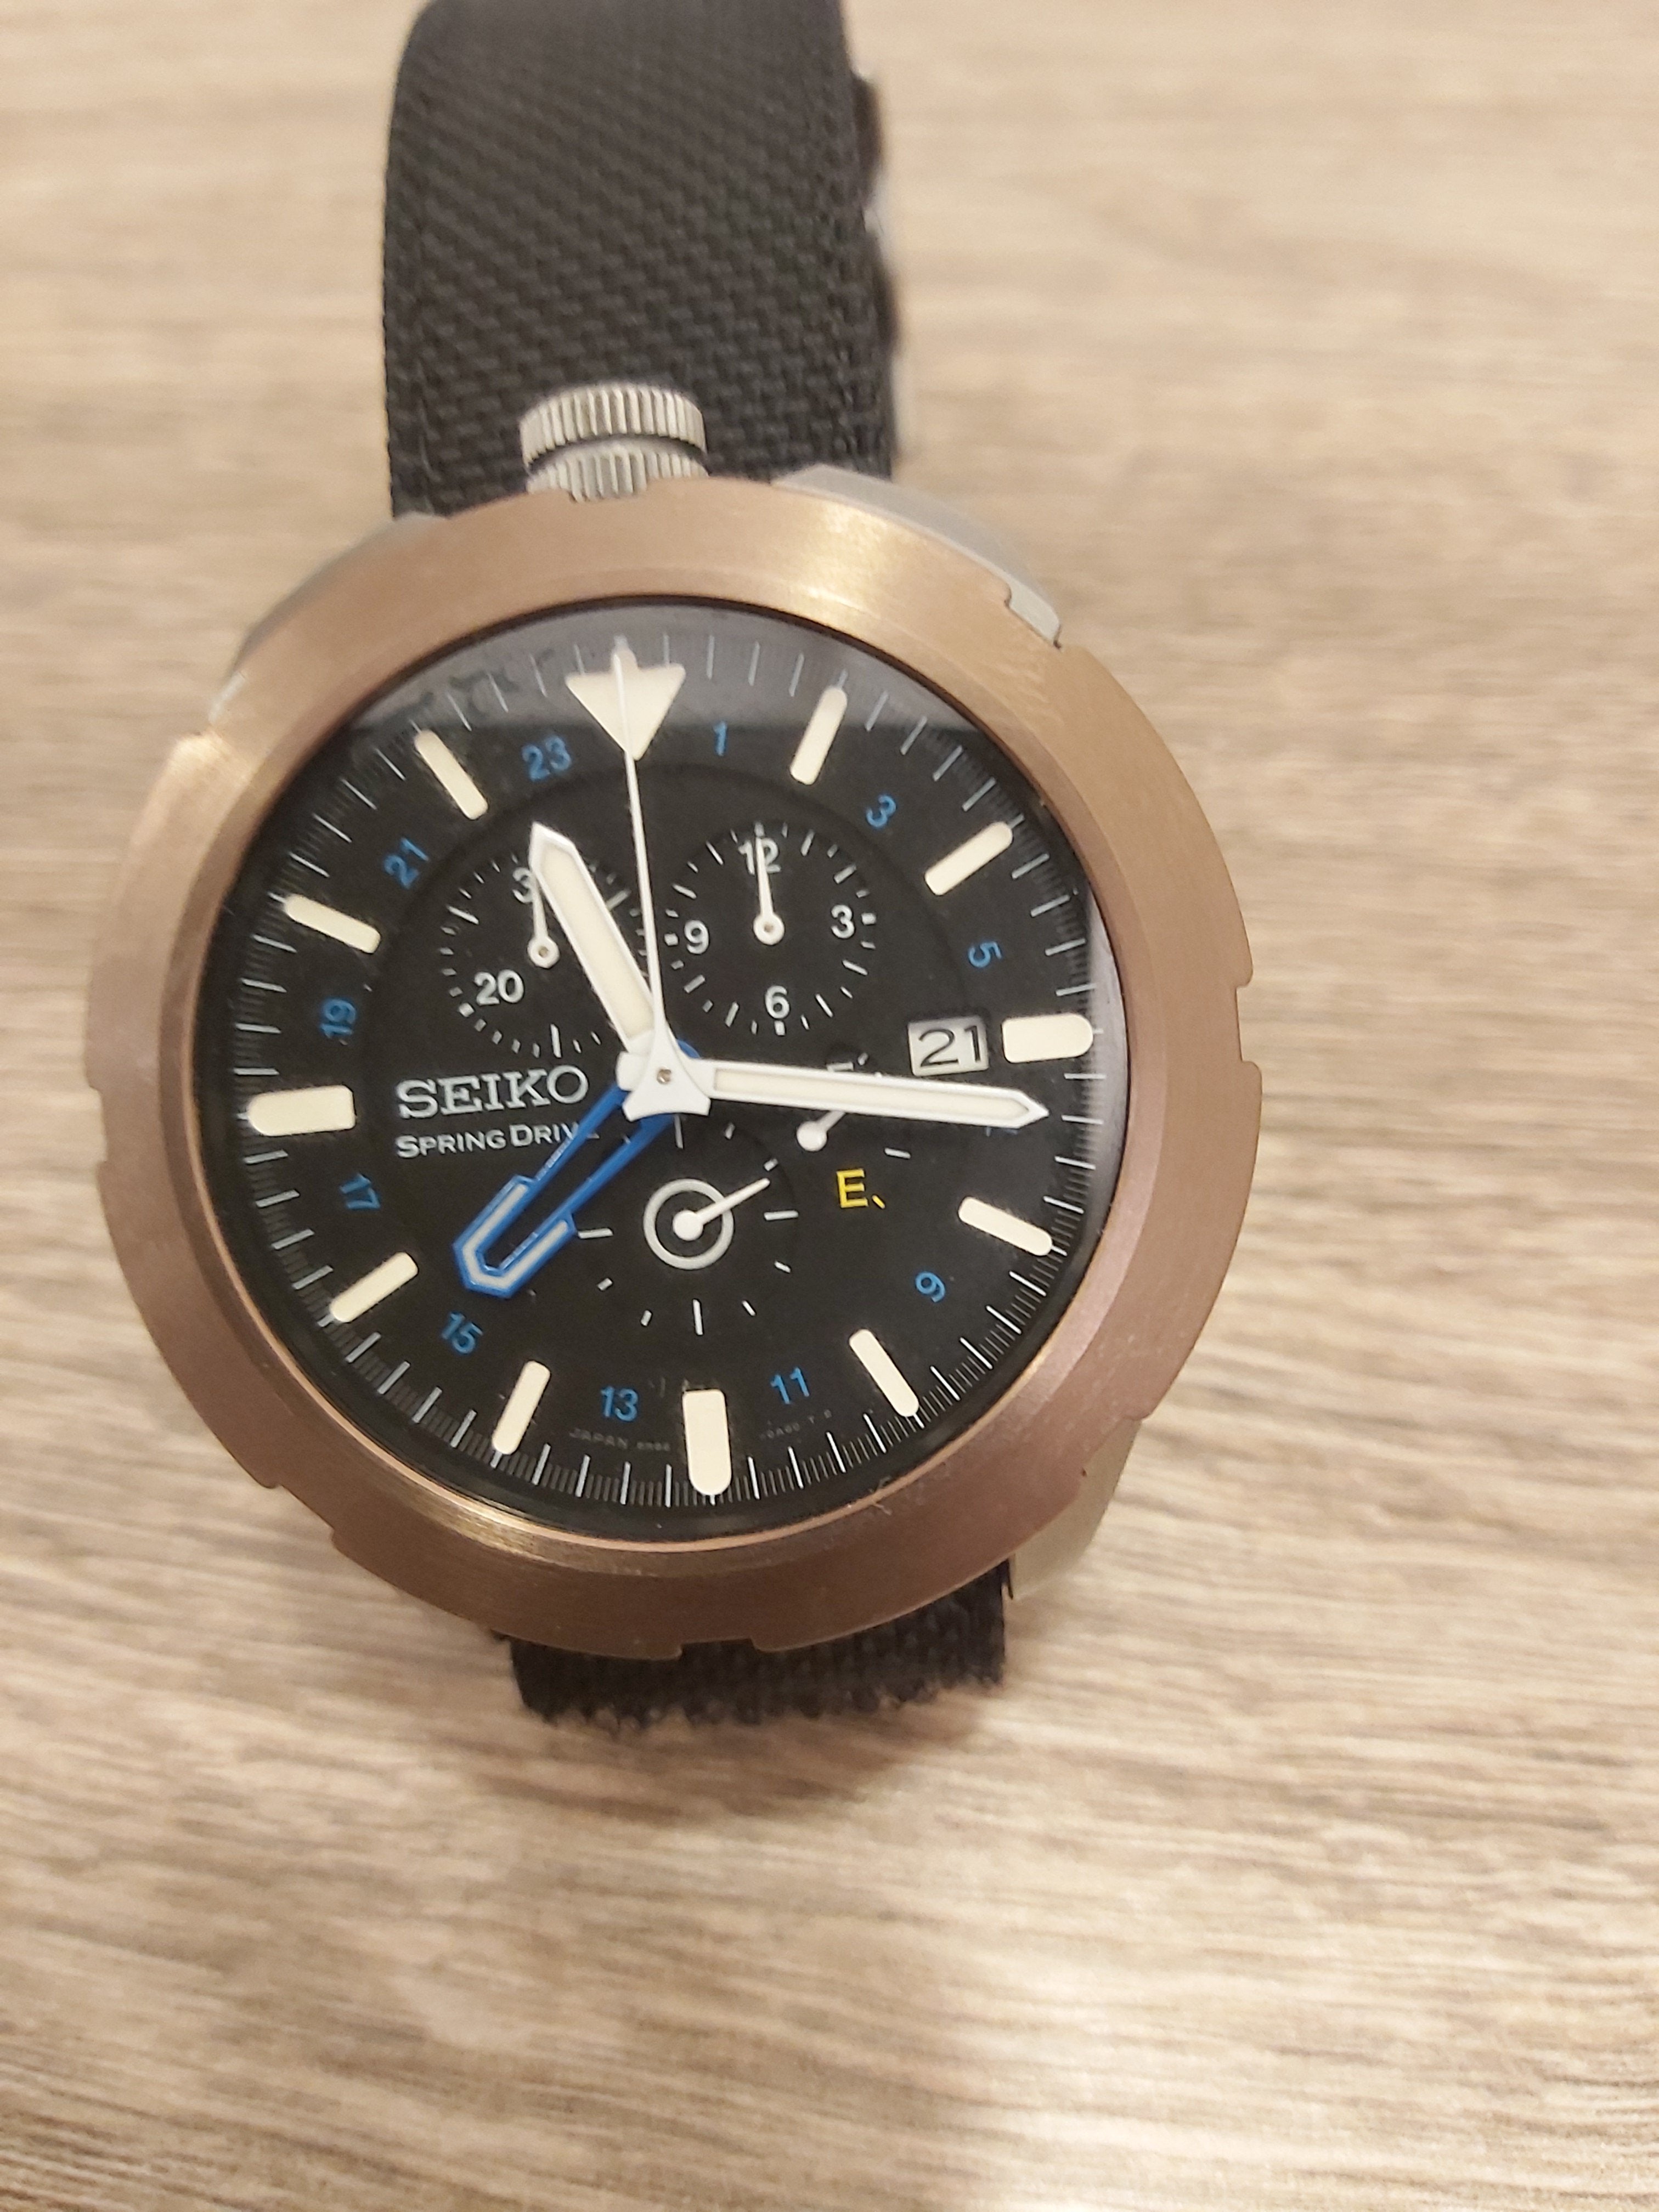 Is SPS005 worth the asking price? | WatchUSeek Watch Forums